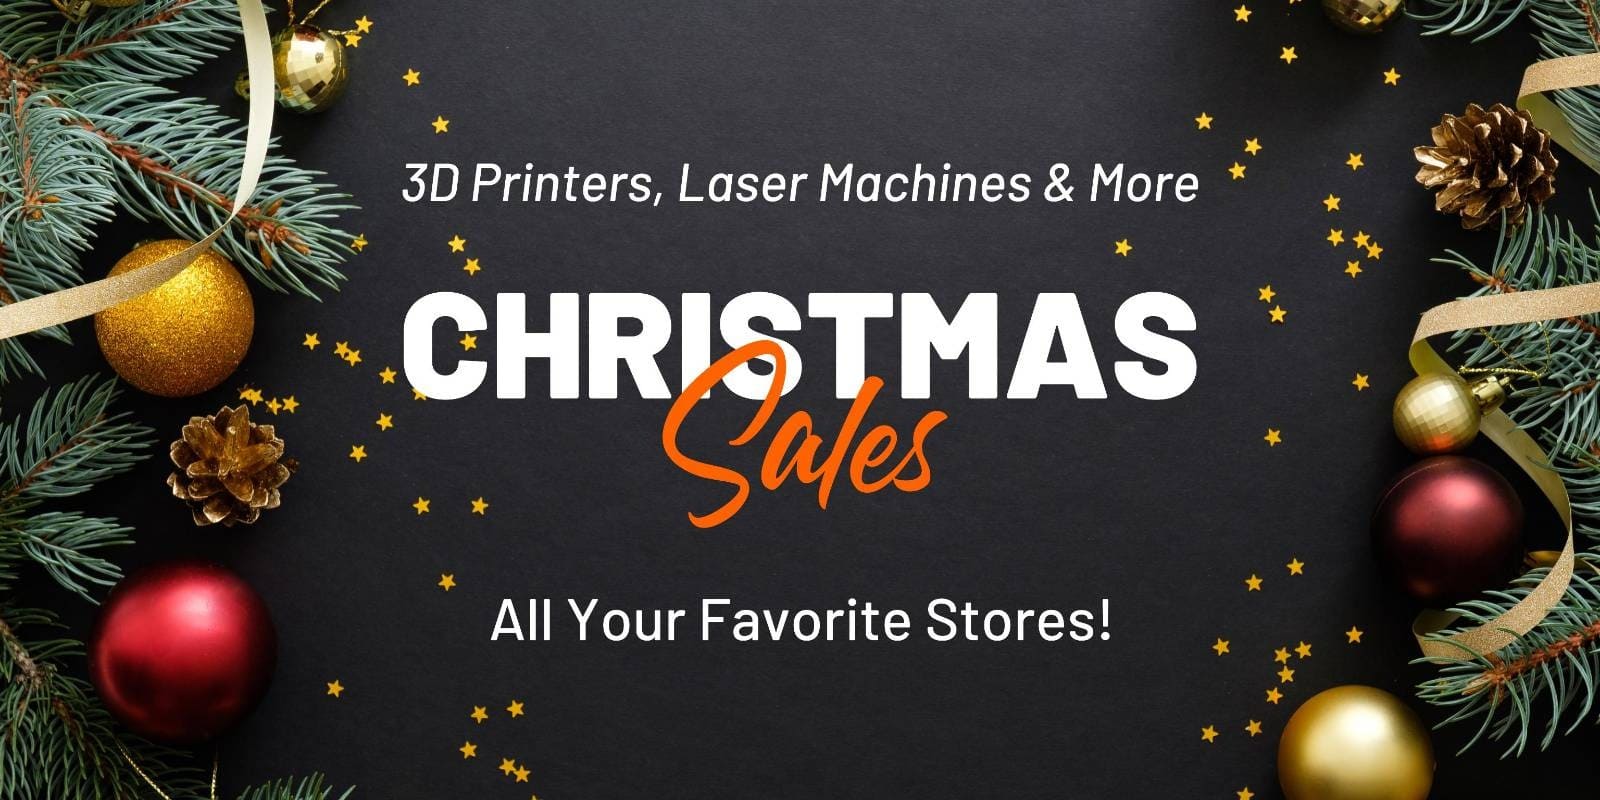 All Christmas deals for 3D printers, laser engravers, and CNC machines